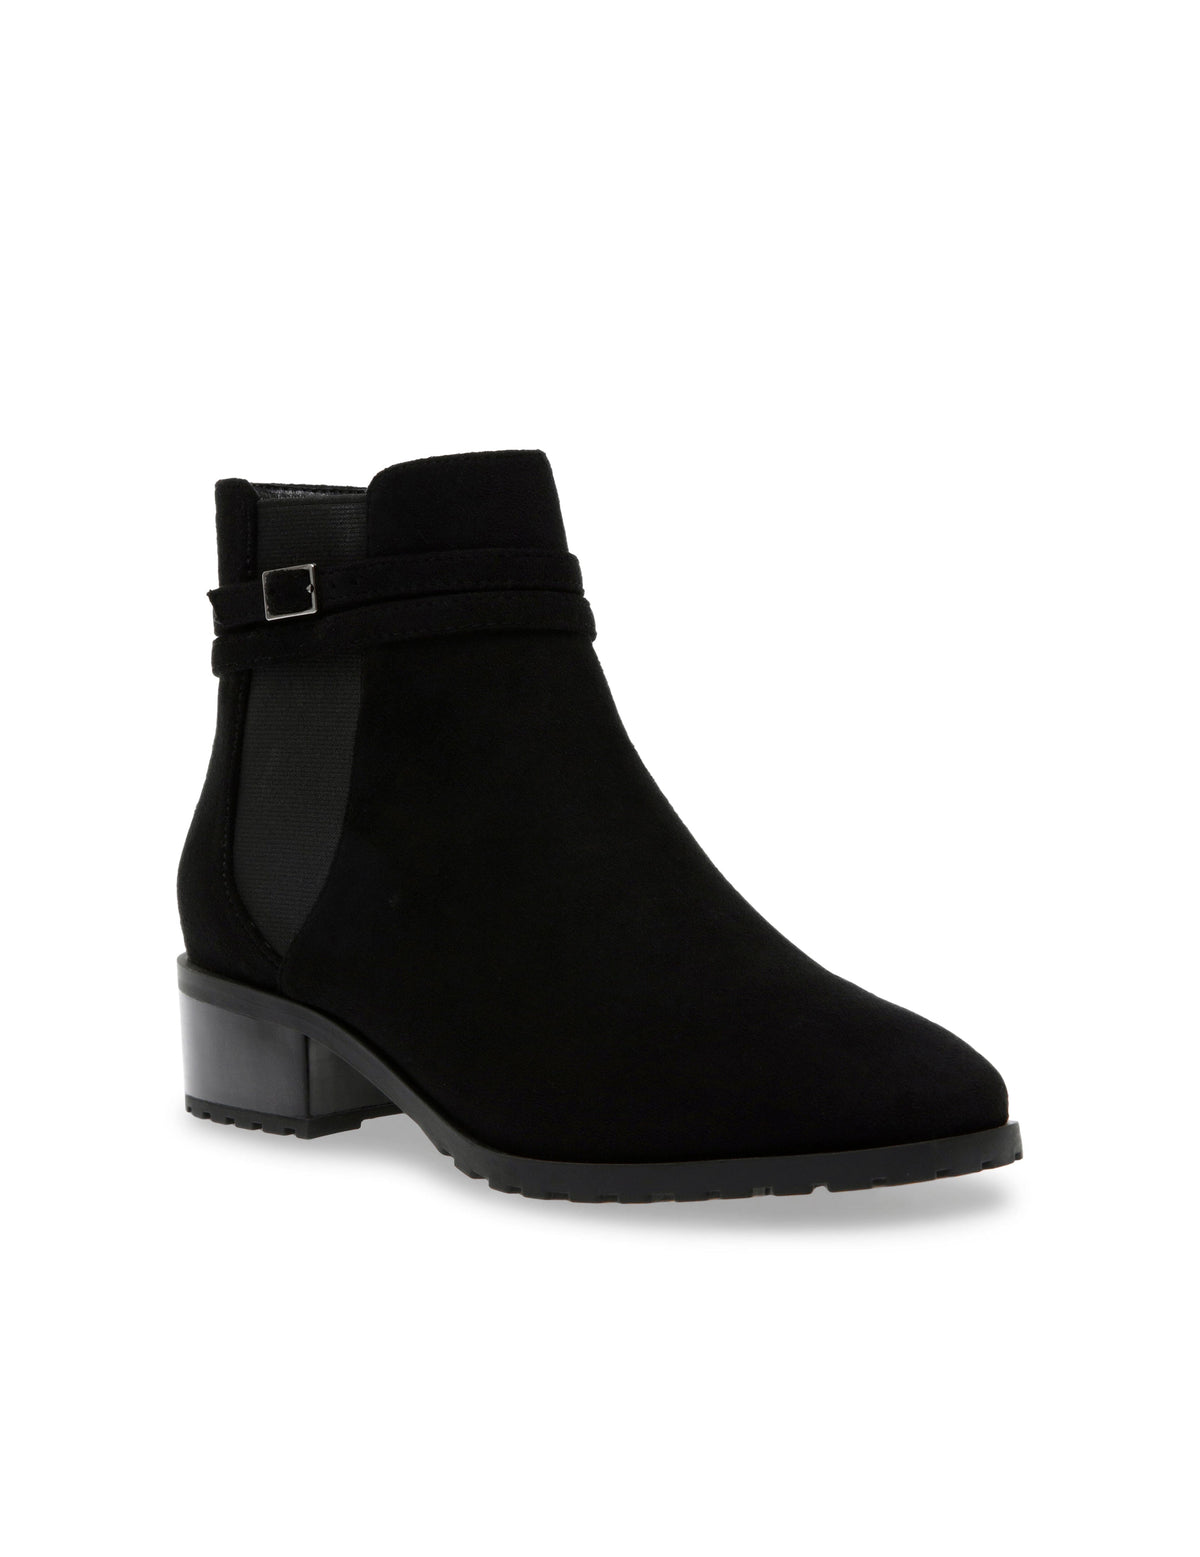 Anne Klein Black Suede Cayla Boot - Clearance